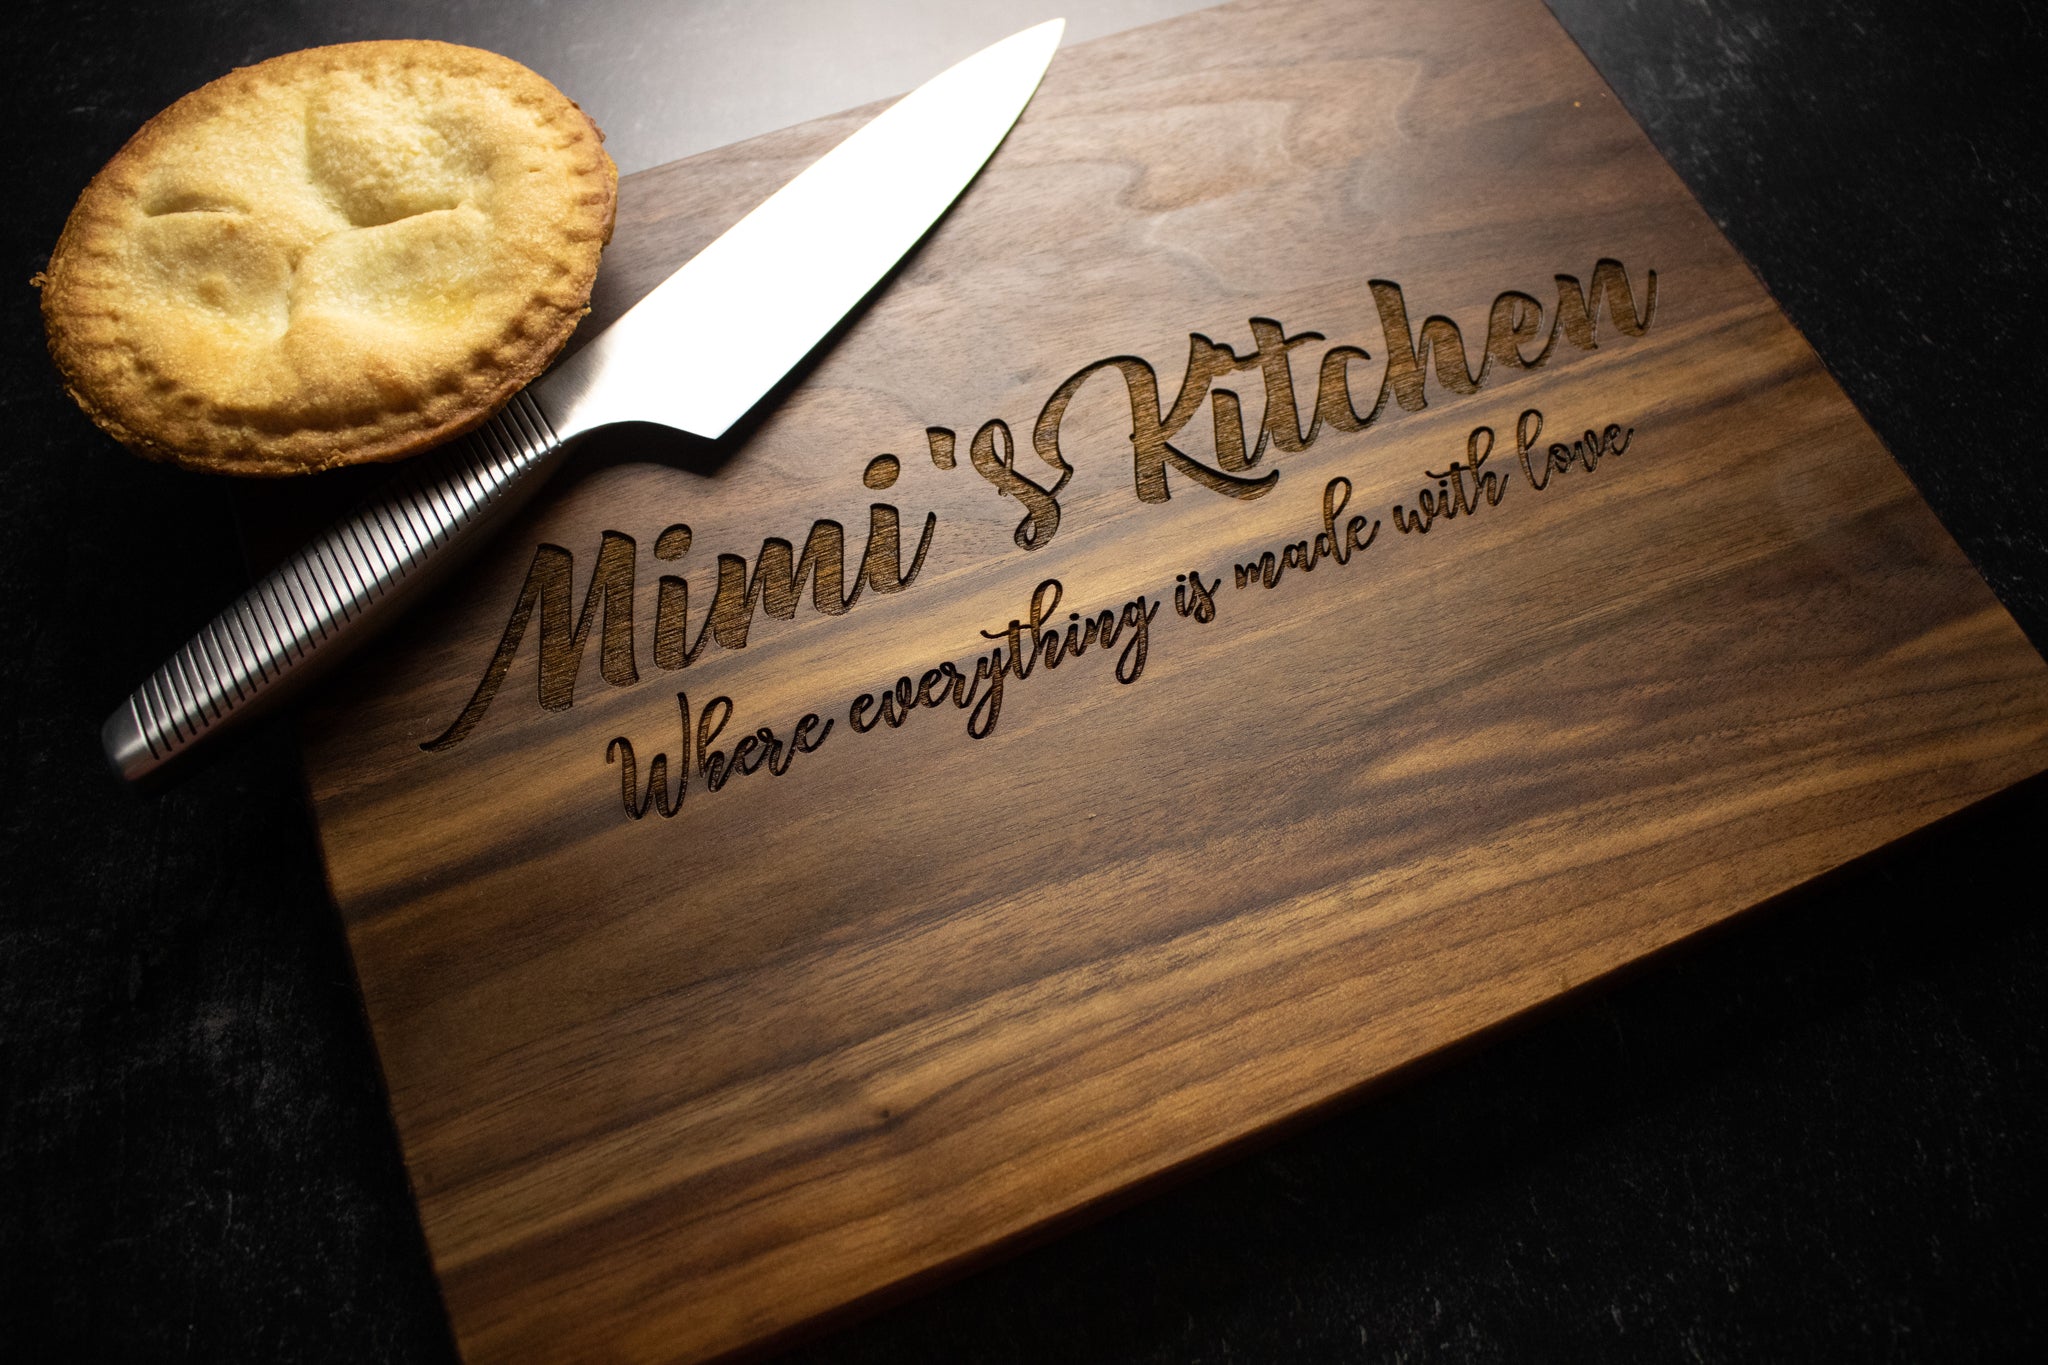 Engraved Made With Love In Nana's Kitchen Cutting Board